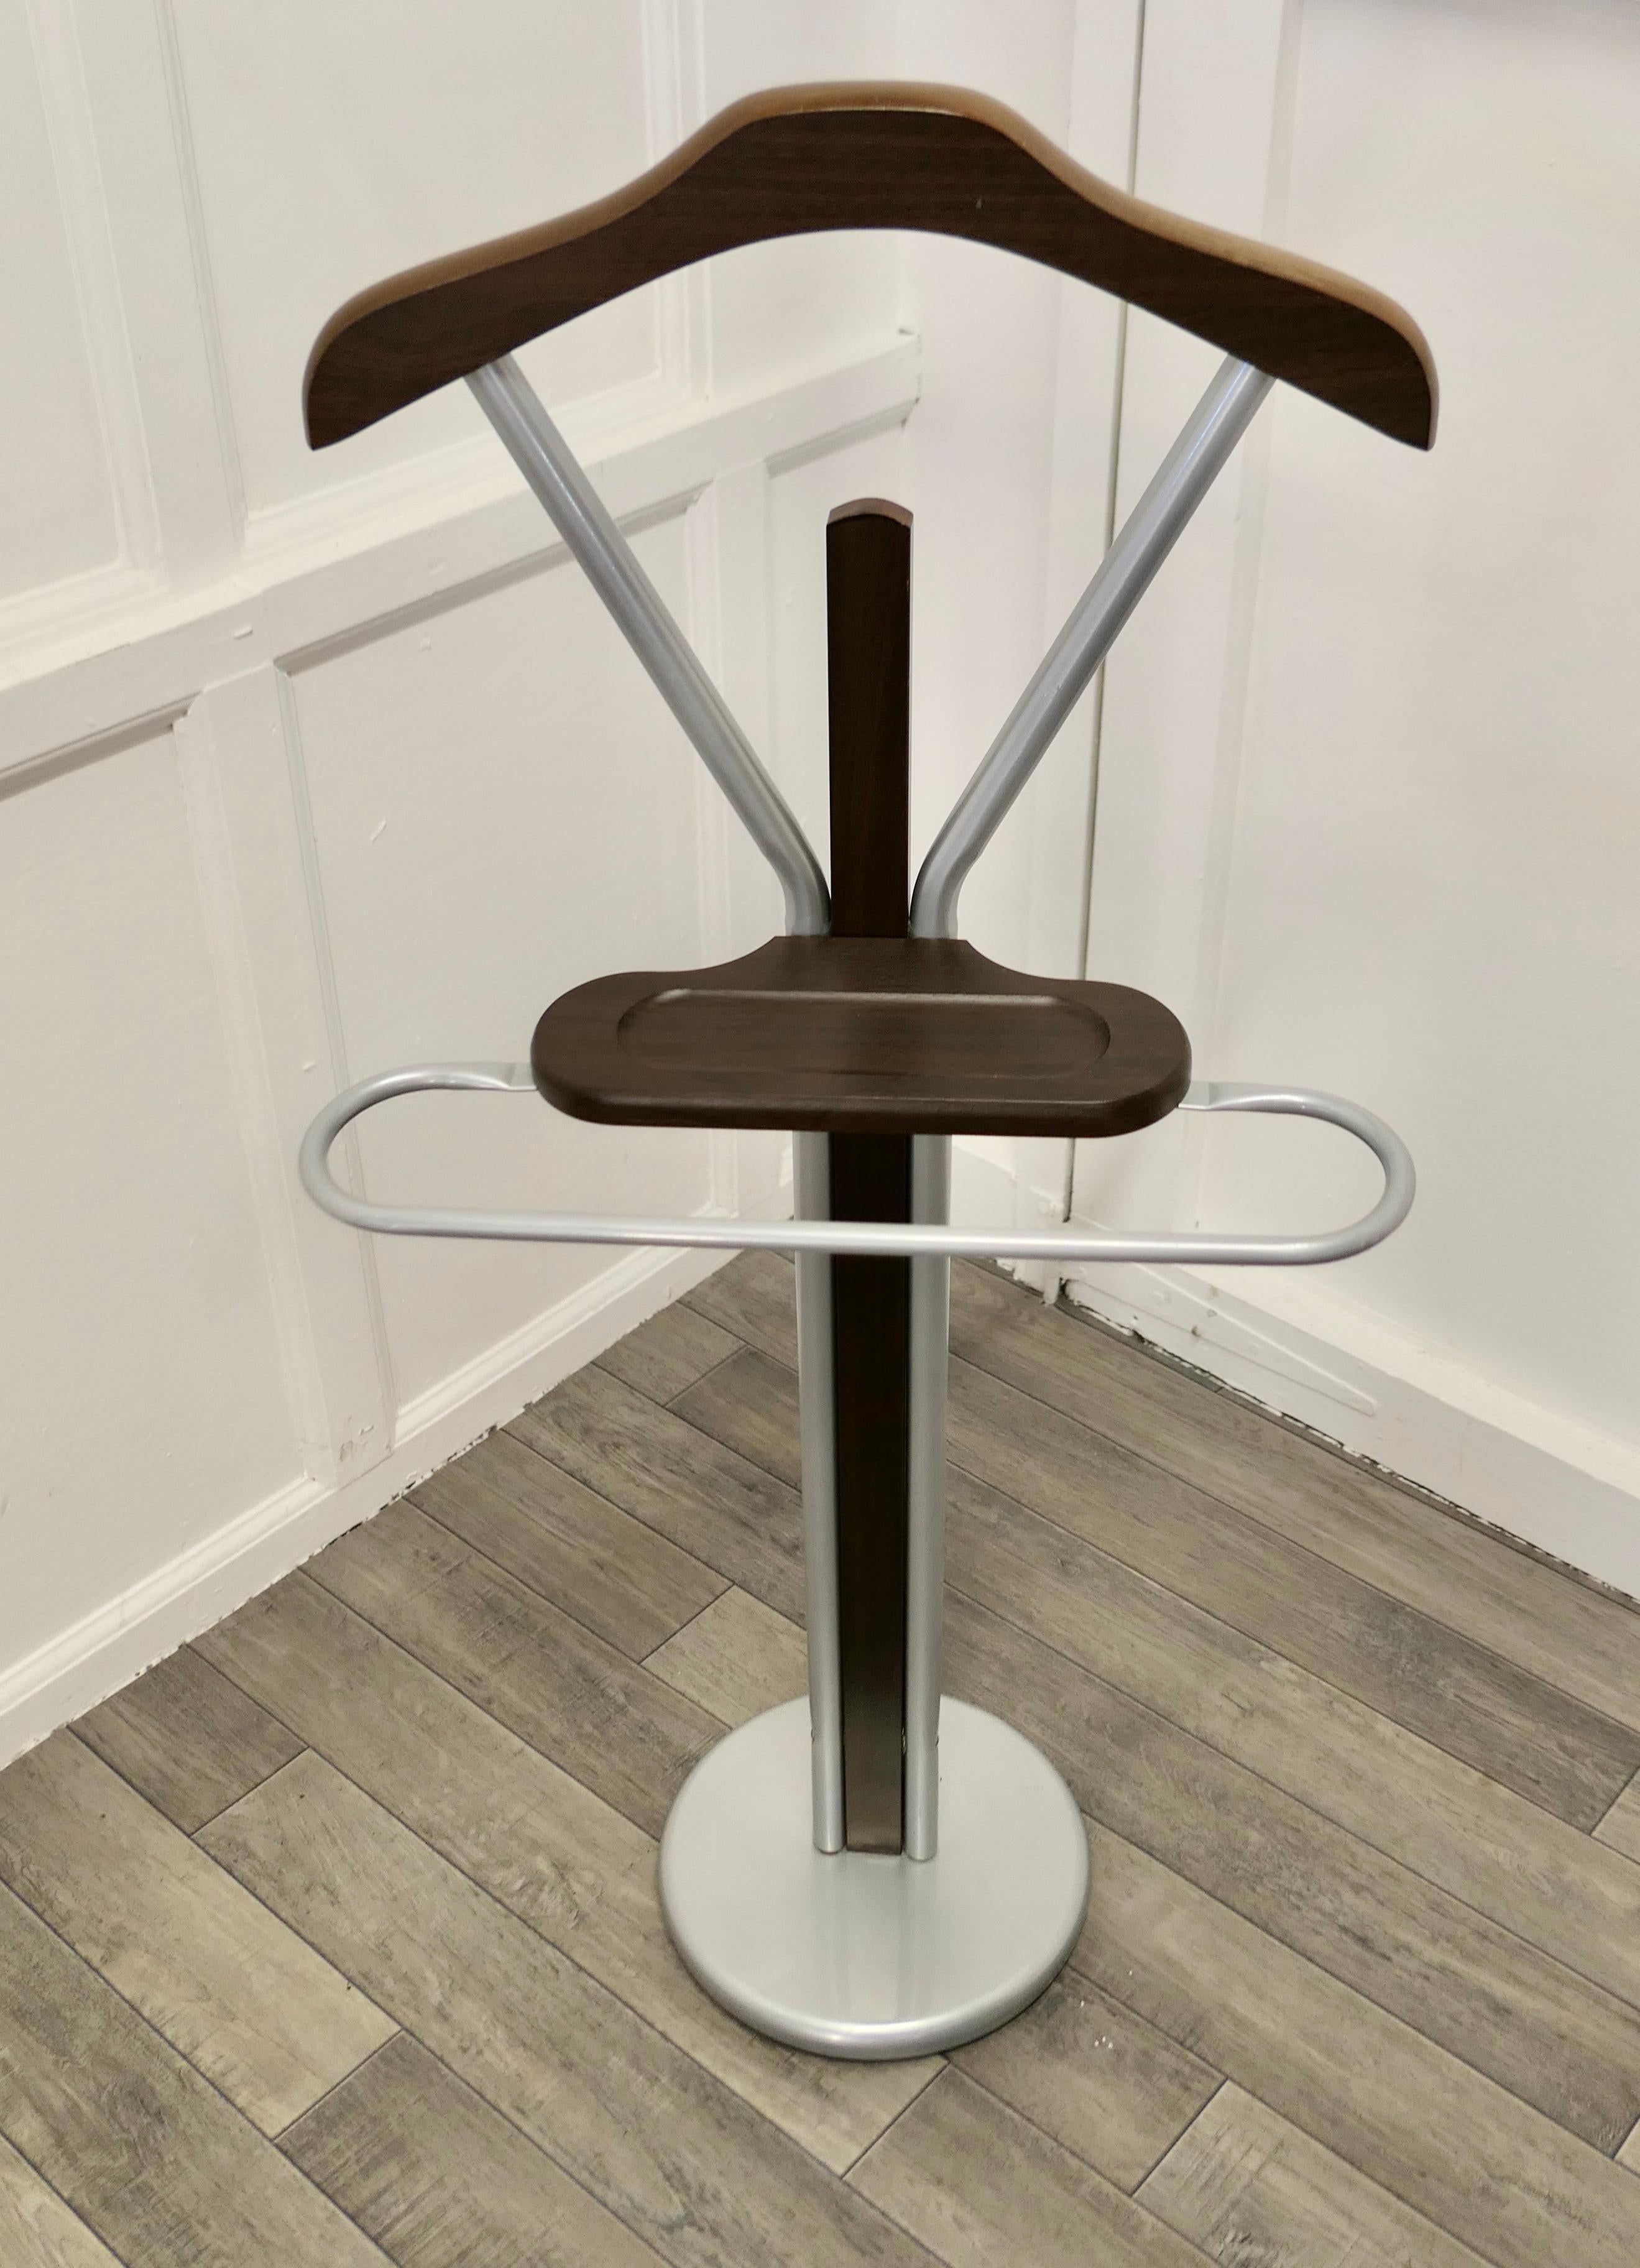 Mid Century Retro chic gentleman’s floor standing suit hanger or dumb valet.


A very useful piece, the Valet or clothes stand has a modern look in brushed aluminium with simulated wood coat hanger and shelf with an aluminium trouser rail
This